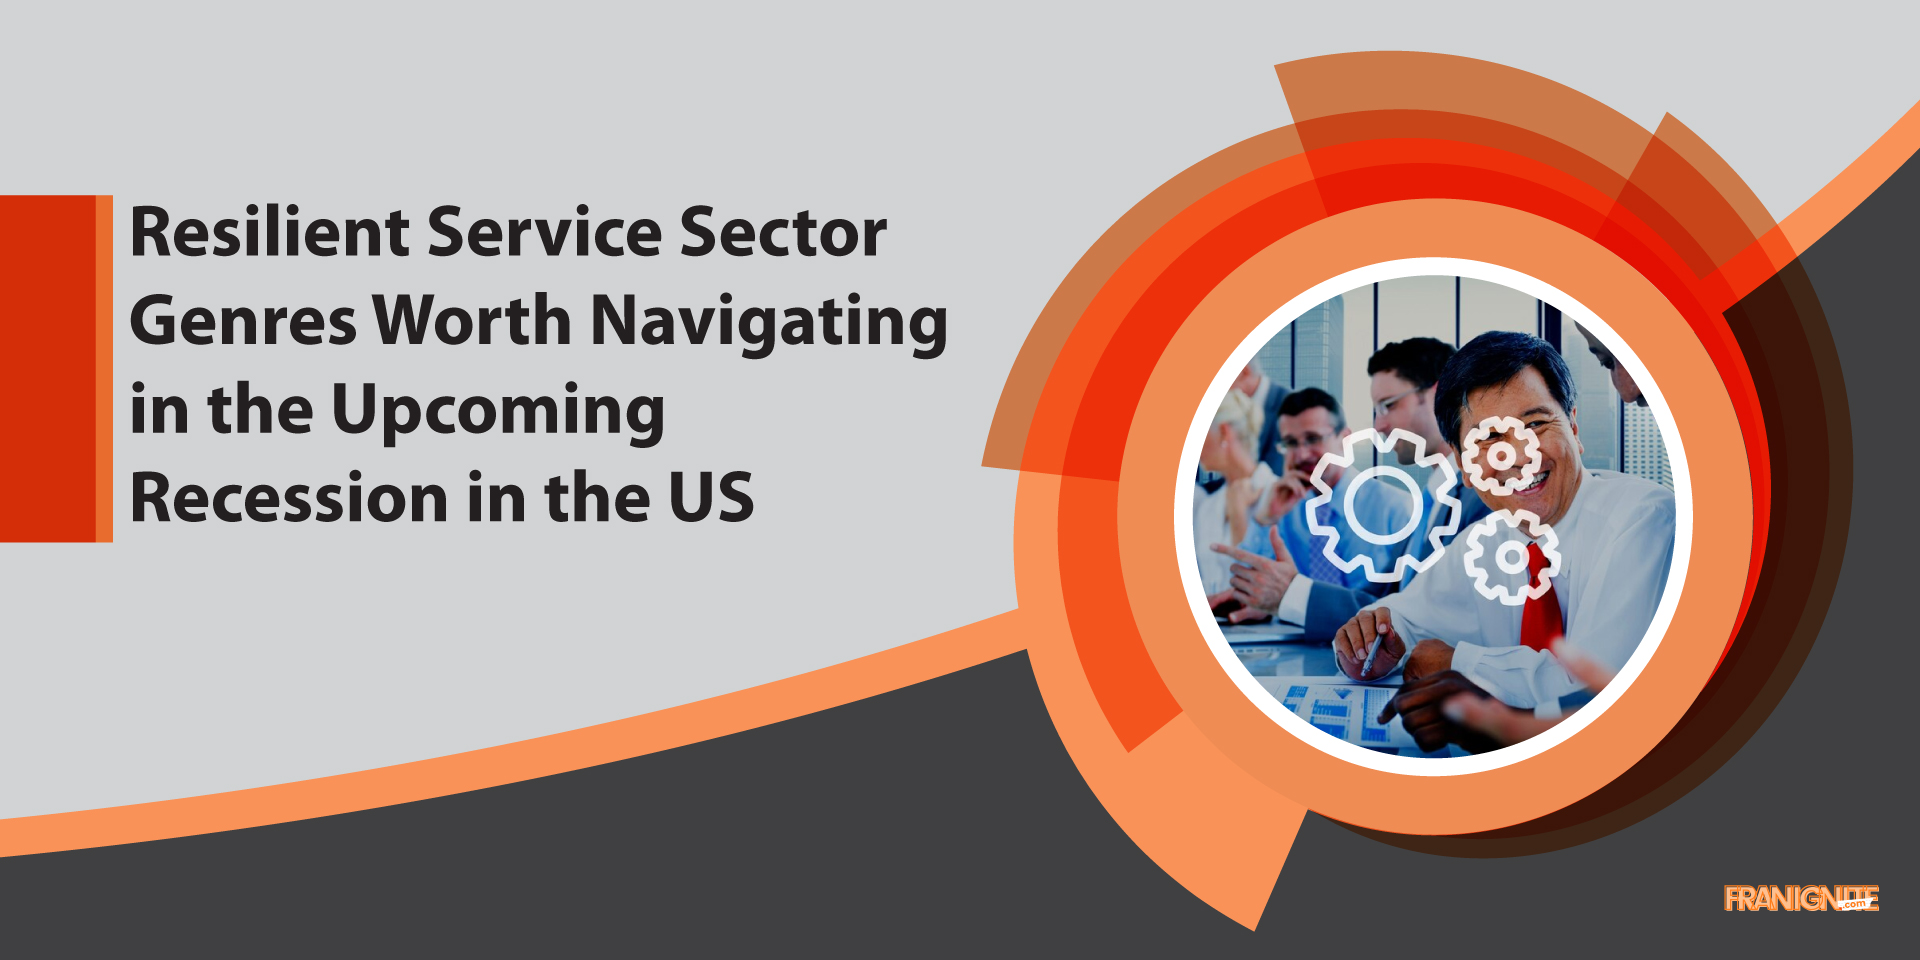 Resilient Service Sector Genres Worth Navigating in the Upcoming Recession in the US